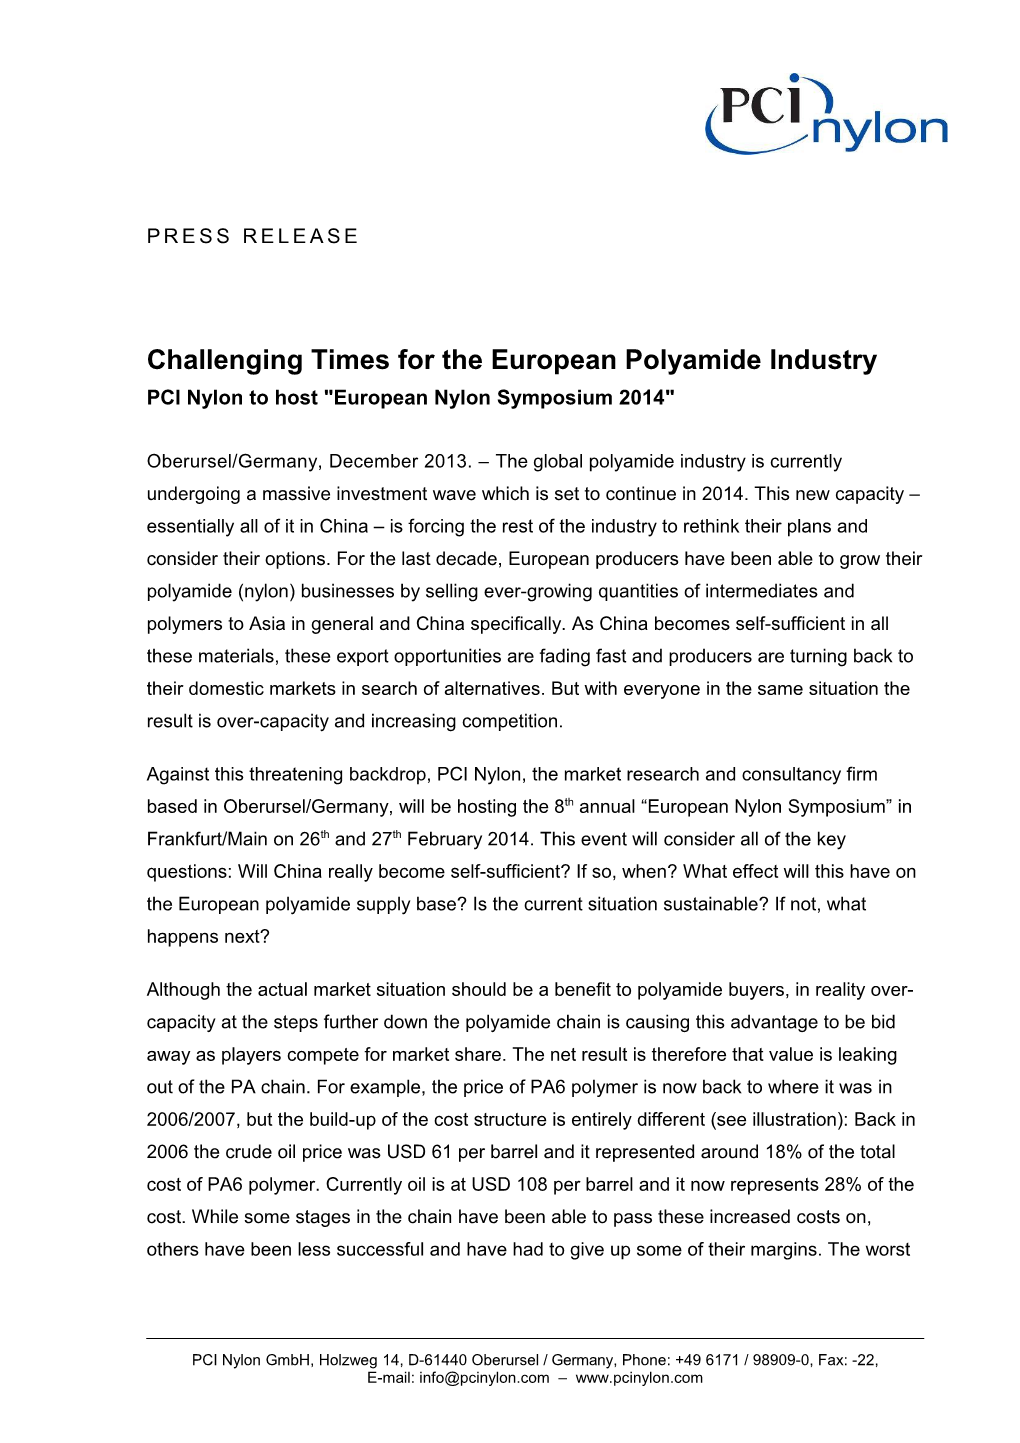 Challenging Times for the European Polyamide Industry